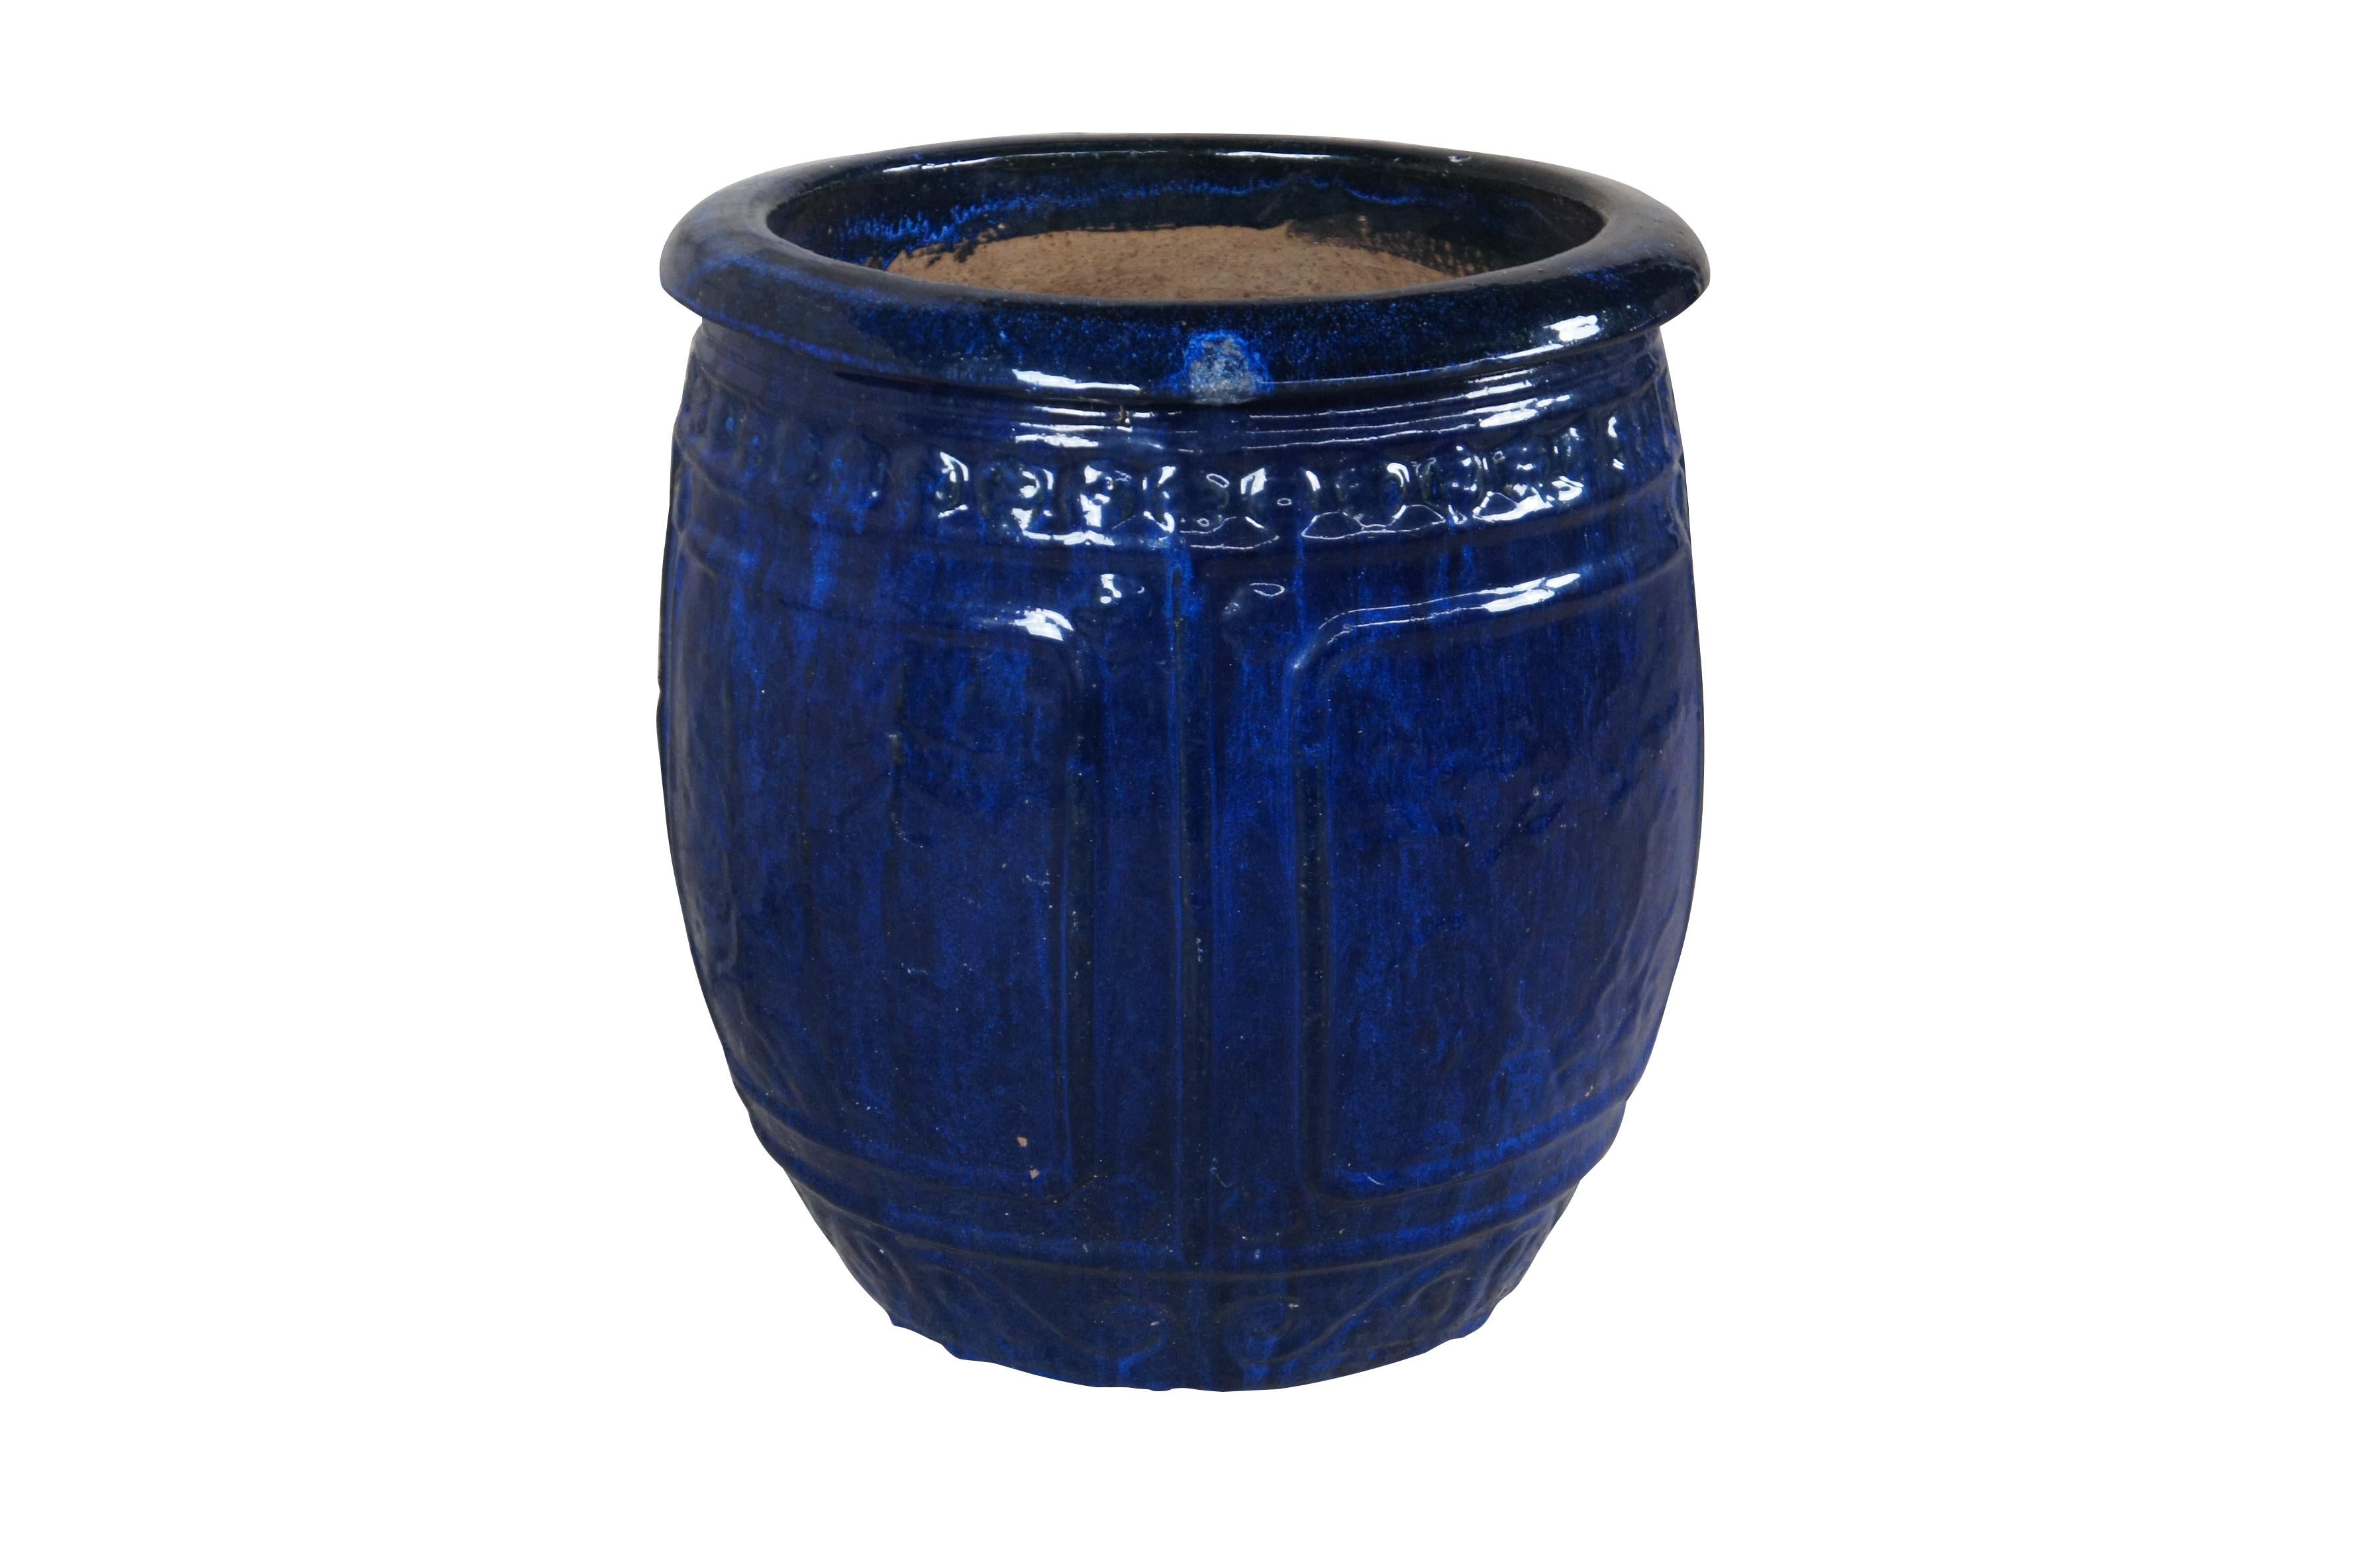 Vintage French clay fired bulbous pot in blue glaze paneling and artistic detail.  2 Drip holes at the base.

DIMENSIONS
17.5